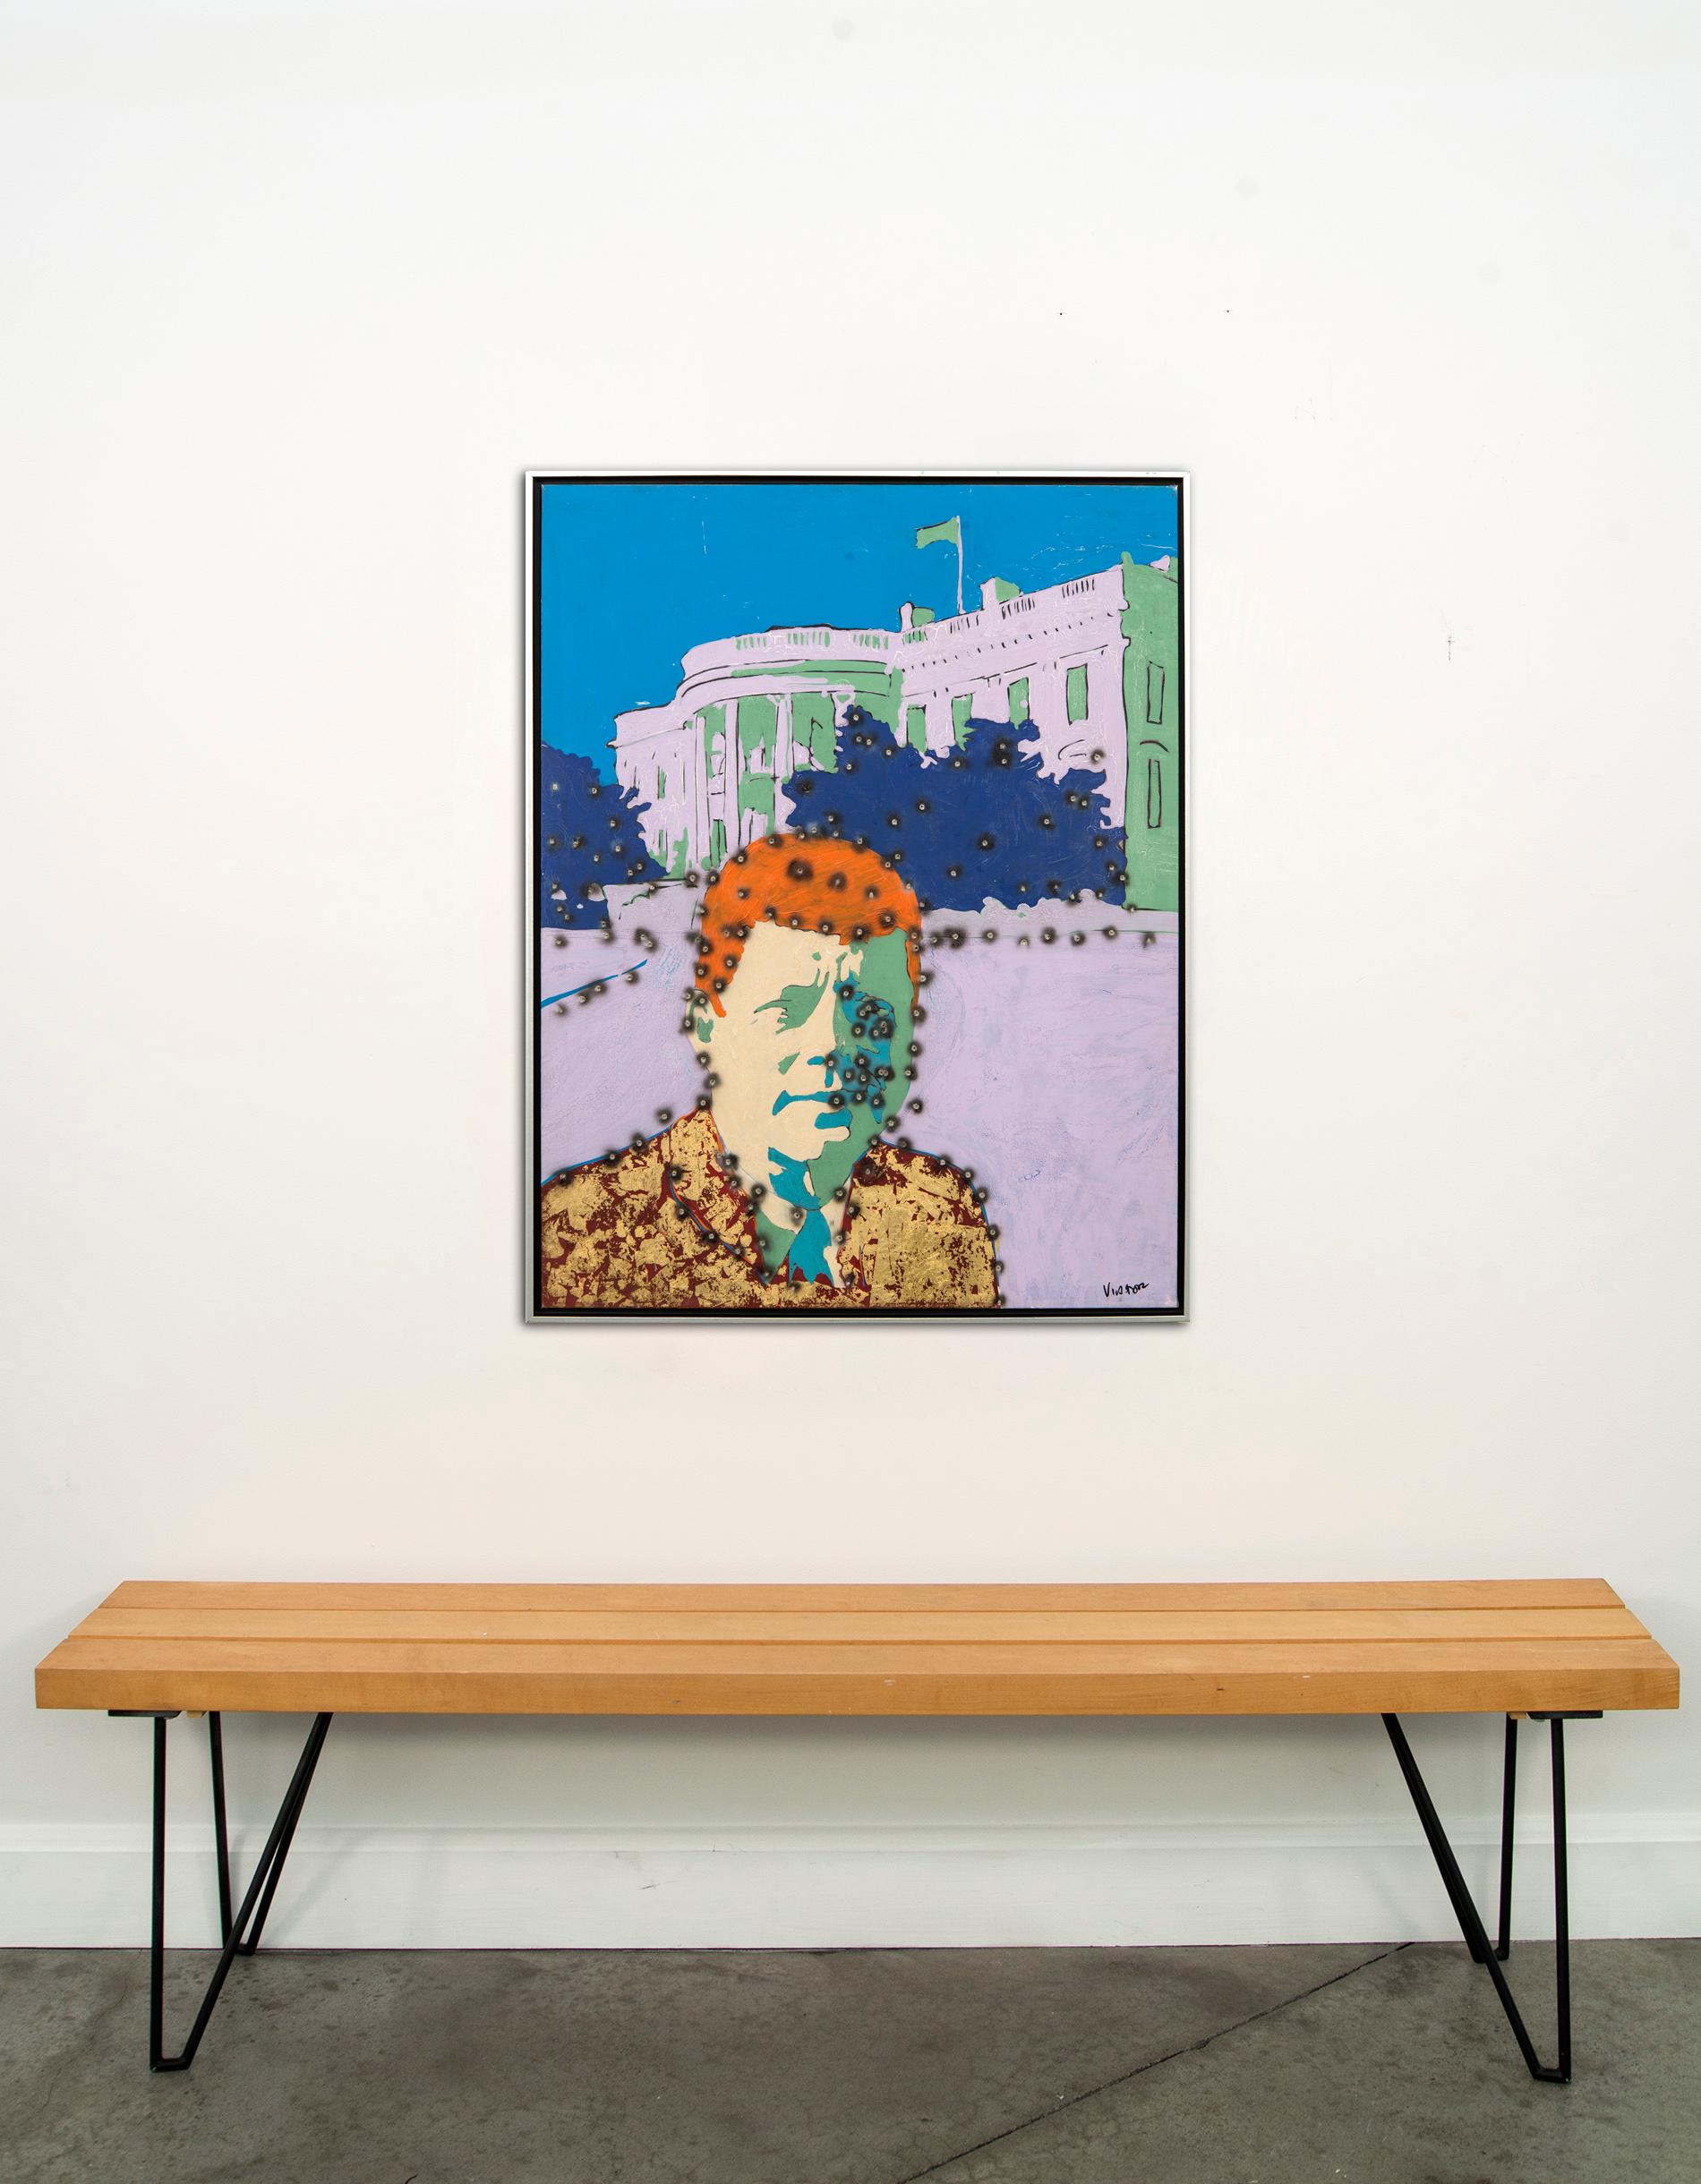 Whitehouse Kennedy - graphic pop-art, cultural America, gilded acrylic on canvas - Painting by Viktor Mitic